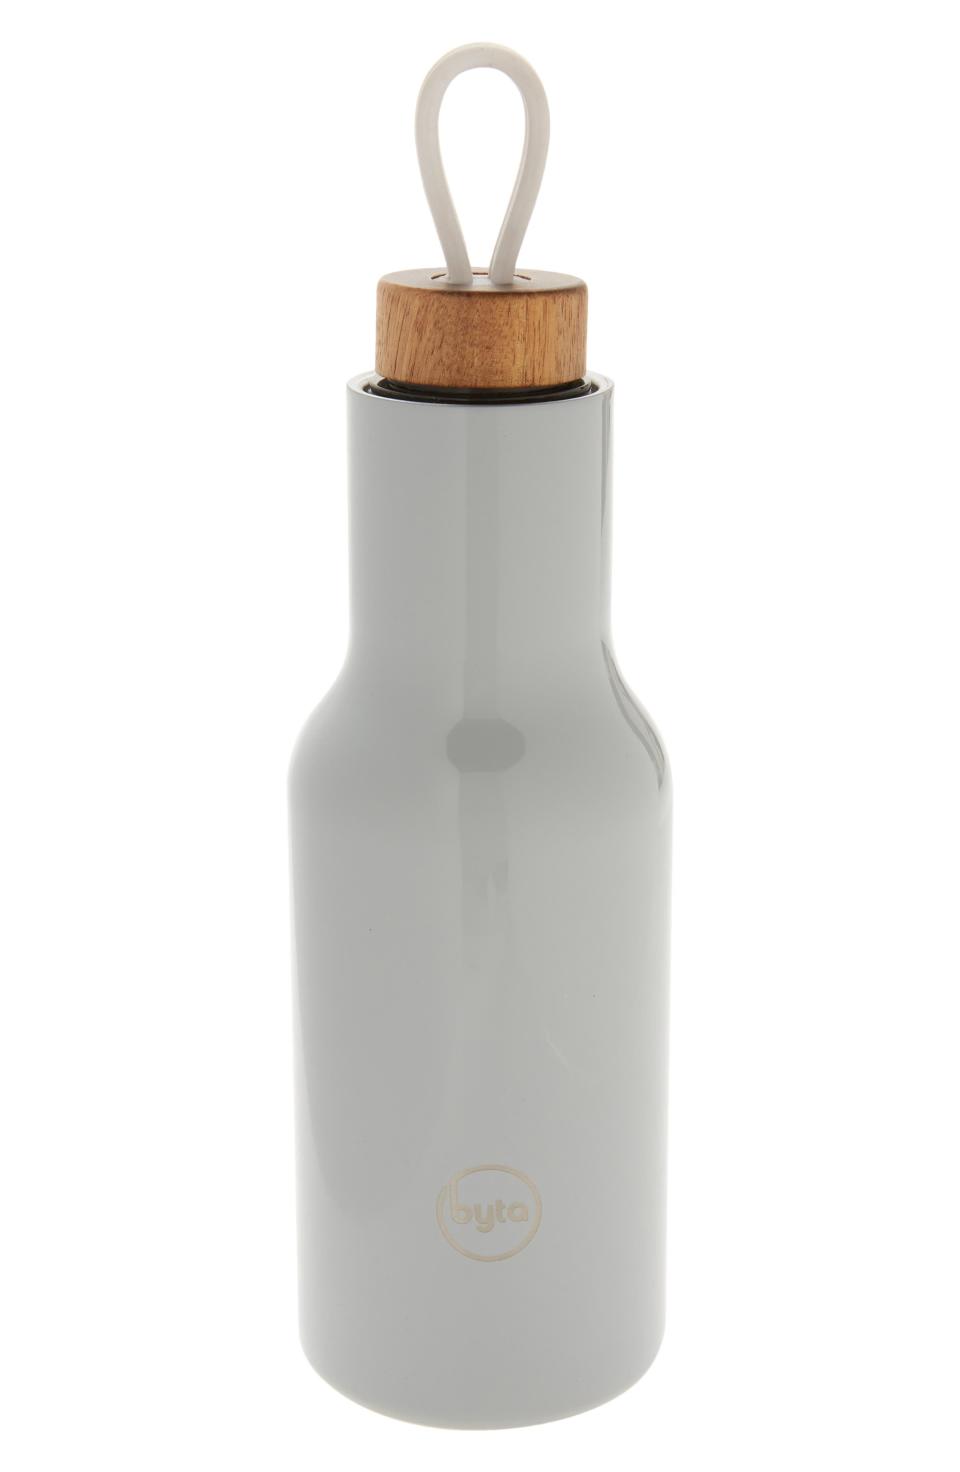 20-Ounce Insulated Bottle